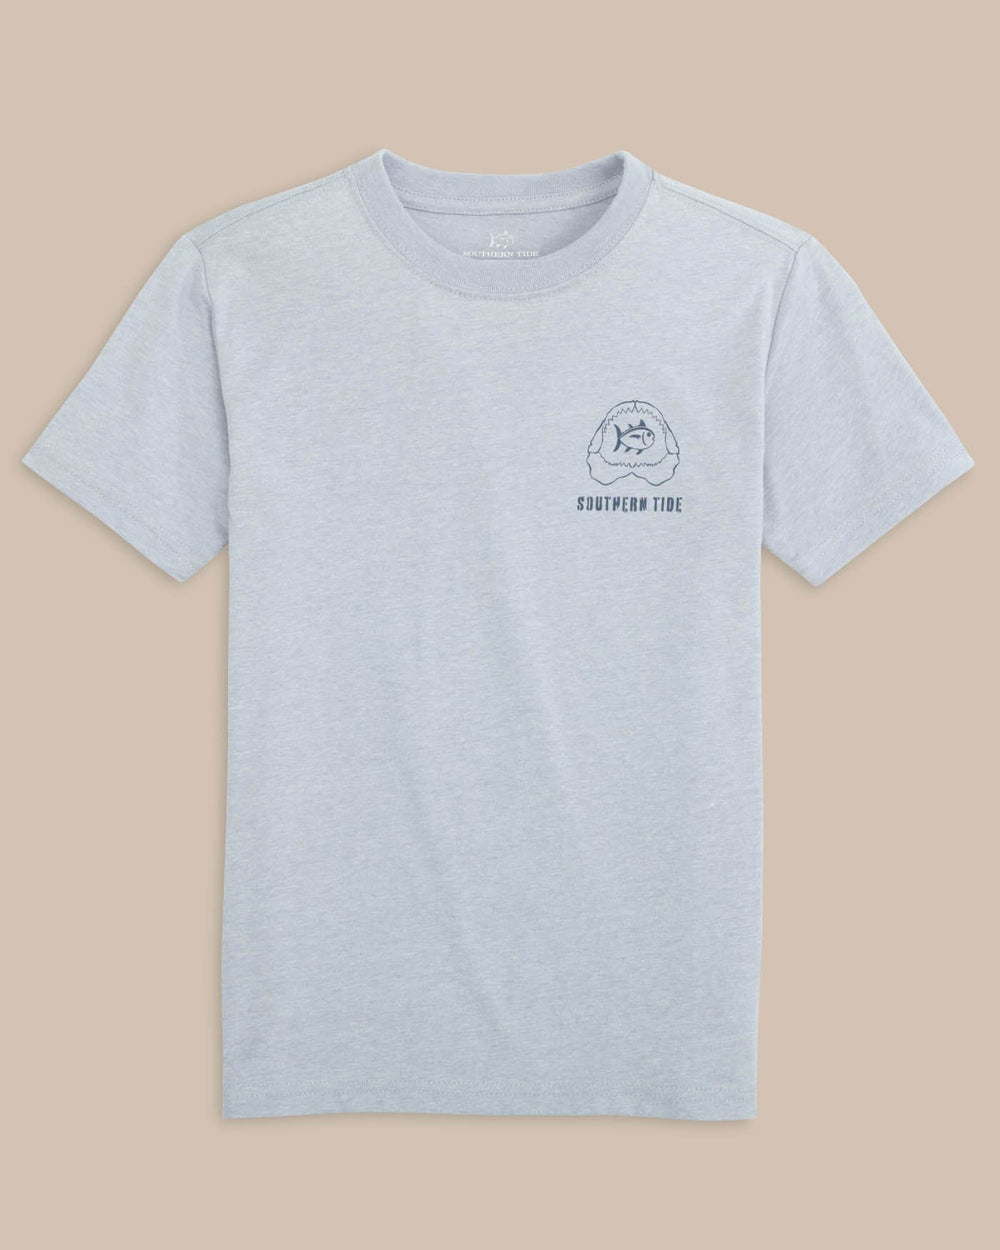 The front view of the Southern Tide Kid's Heather Shark Plank Short Sleeve T-shirt by Southern Tide - Heather Platinum Grey